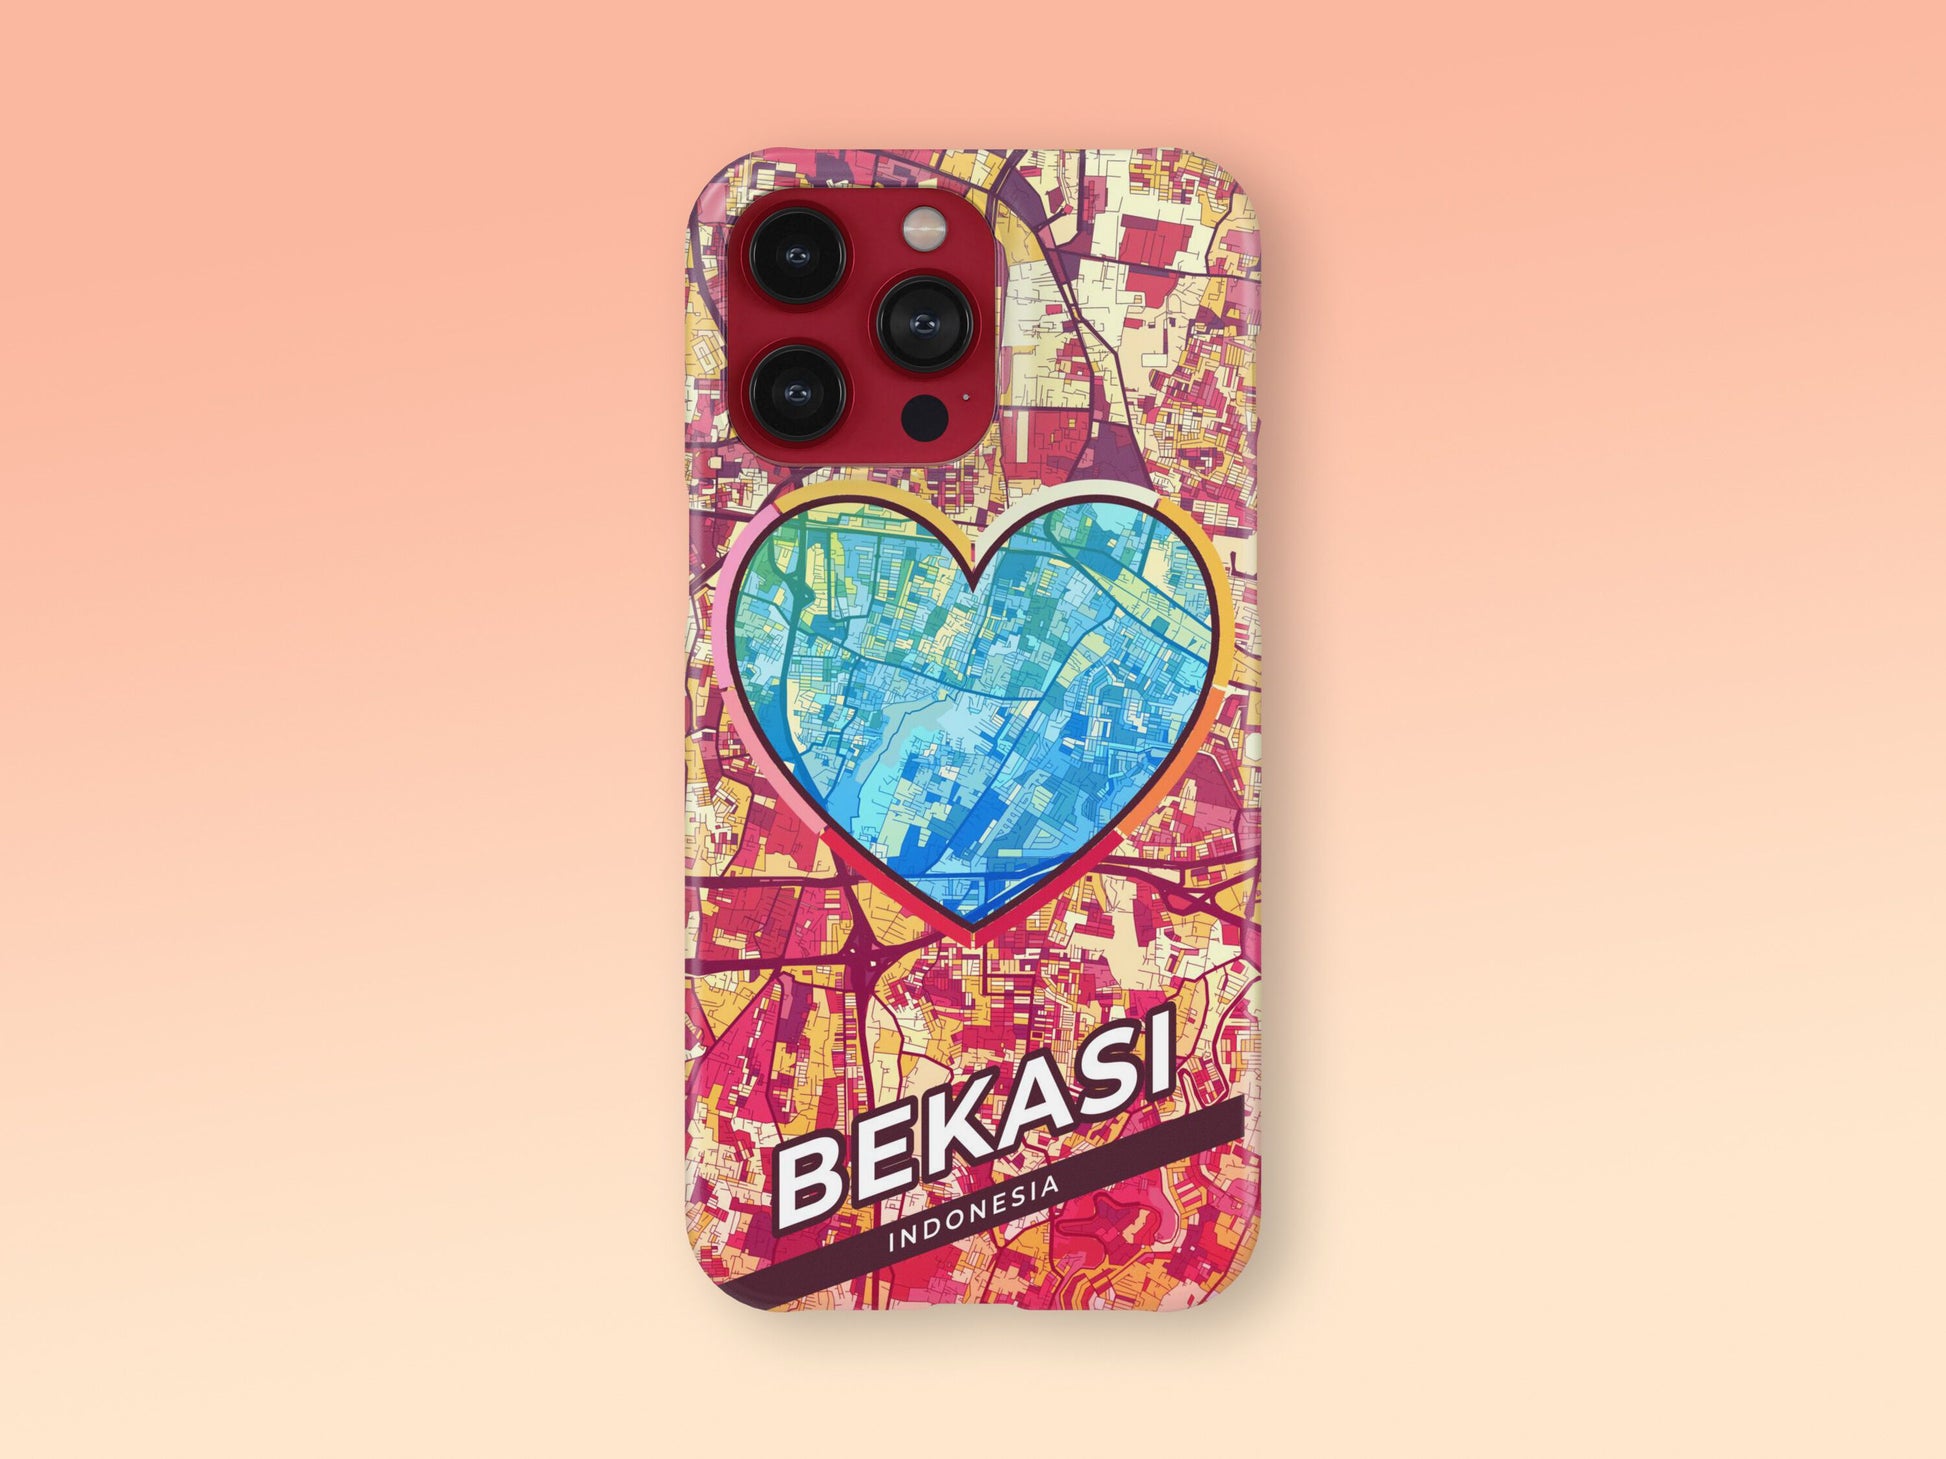 Bekasi Indonesia slim phone case with colorful icon. Birthday, wedding or housewarming gift. Couple match cases. 2